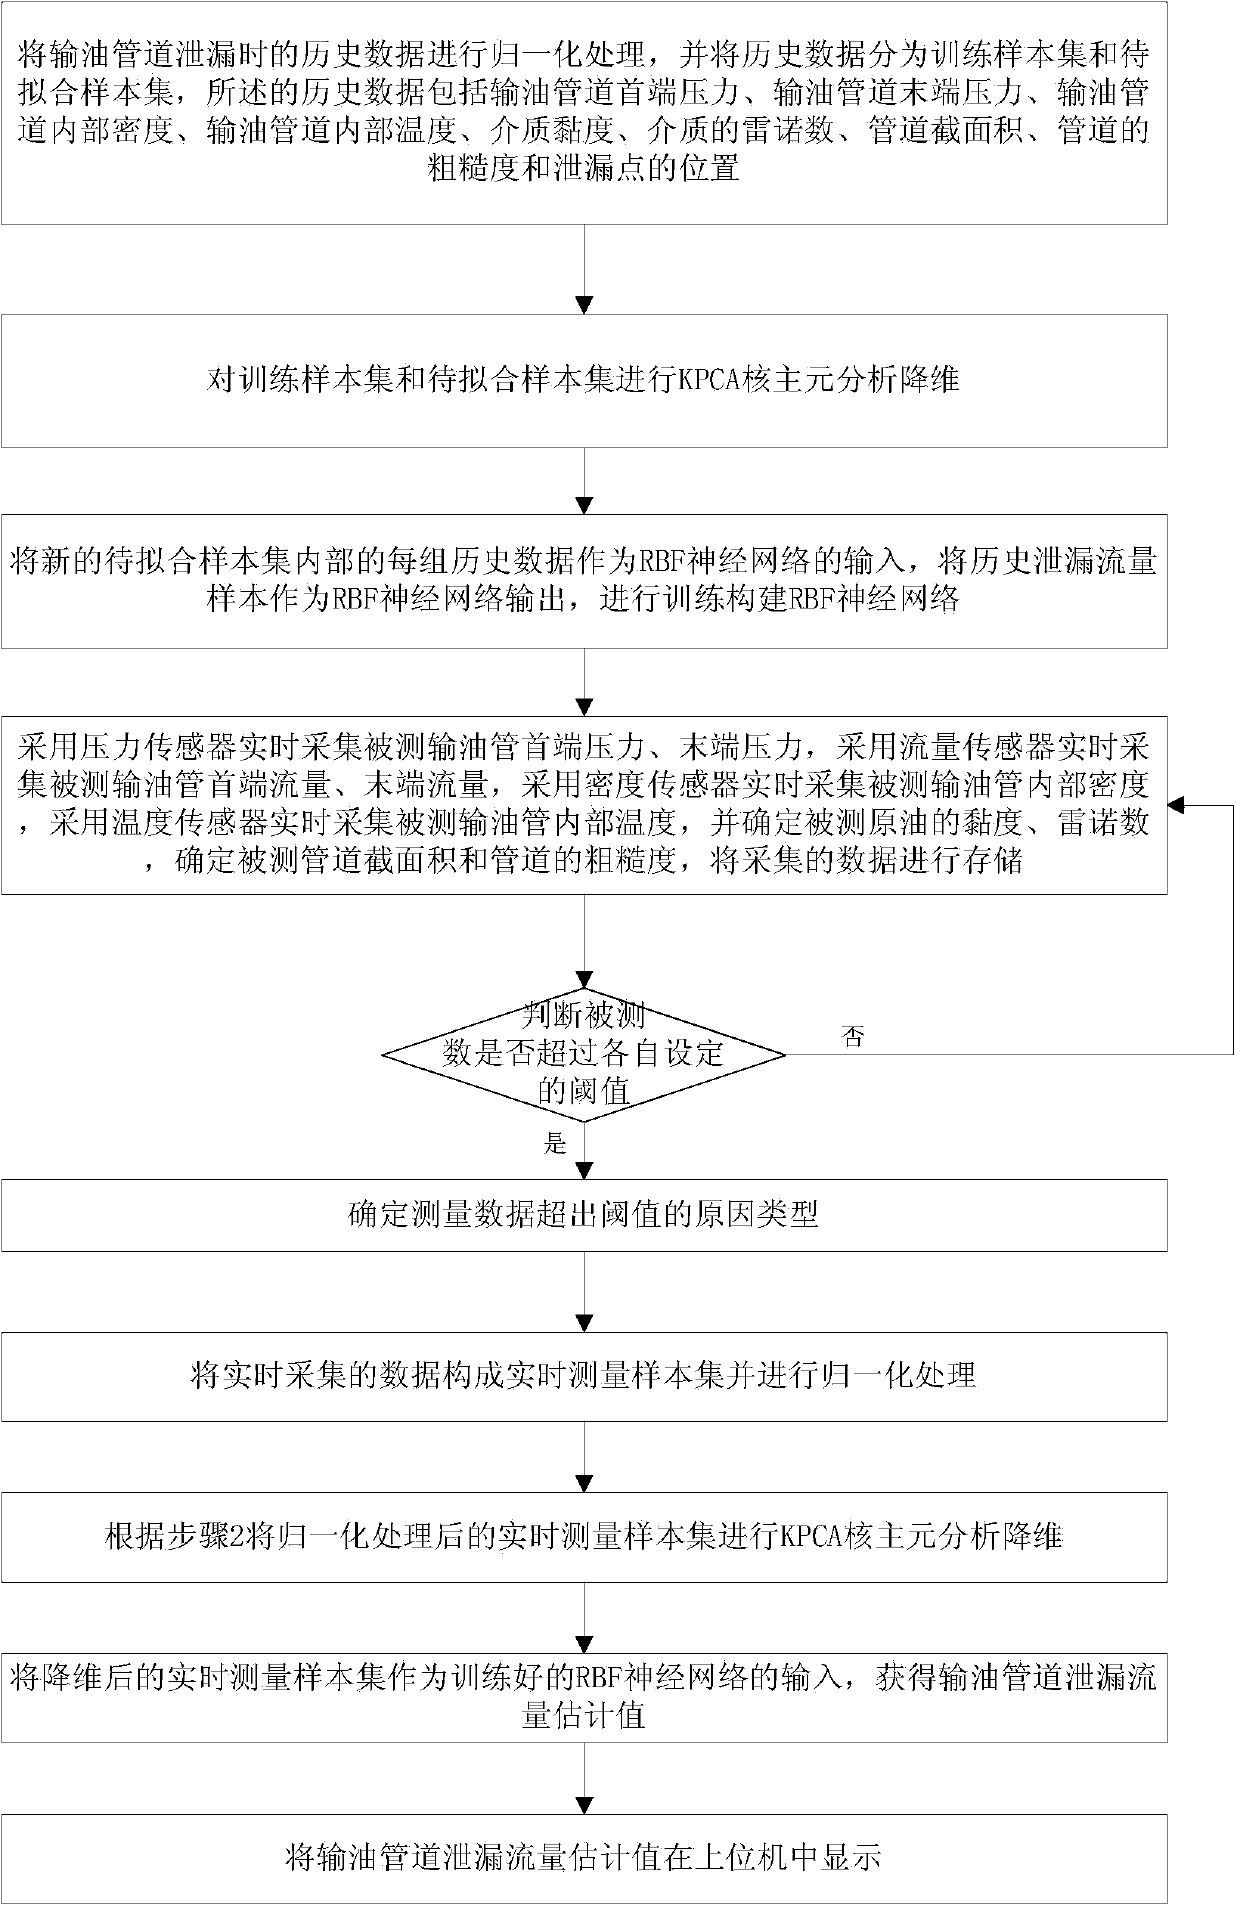 Oil transportation pipeline leakage flow estimating device and method based on KPCA-RBF curve fitting